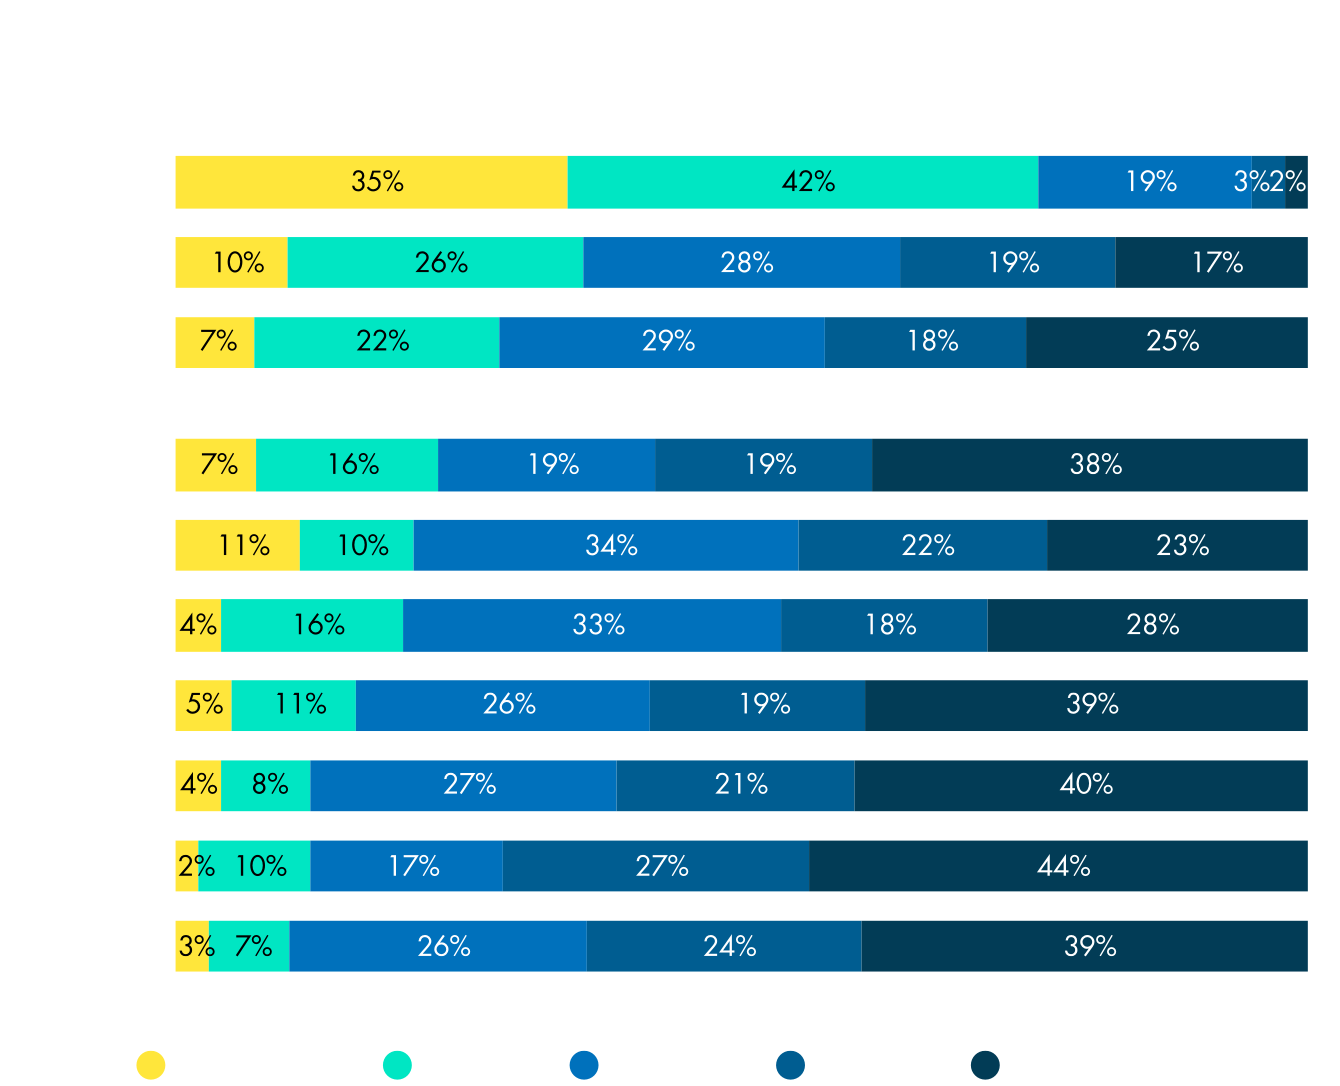 Chart showing those in the UAE, Australia and Italy are most likely to install solar in the next two years.